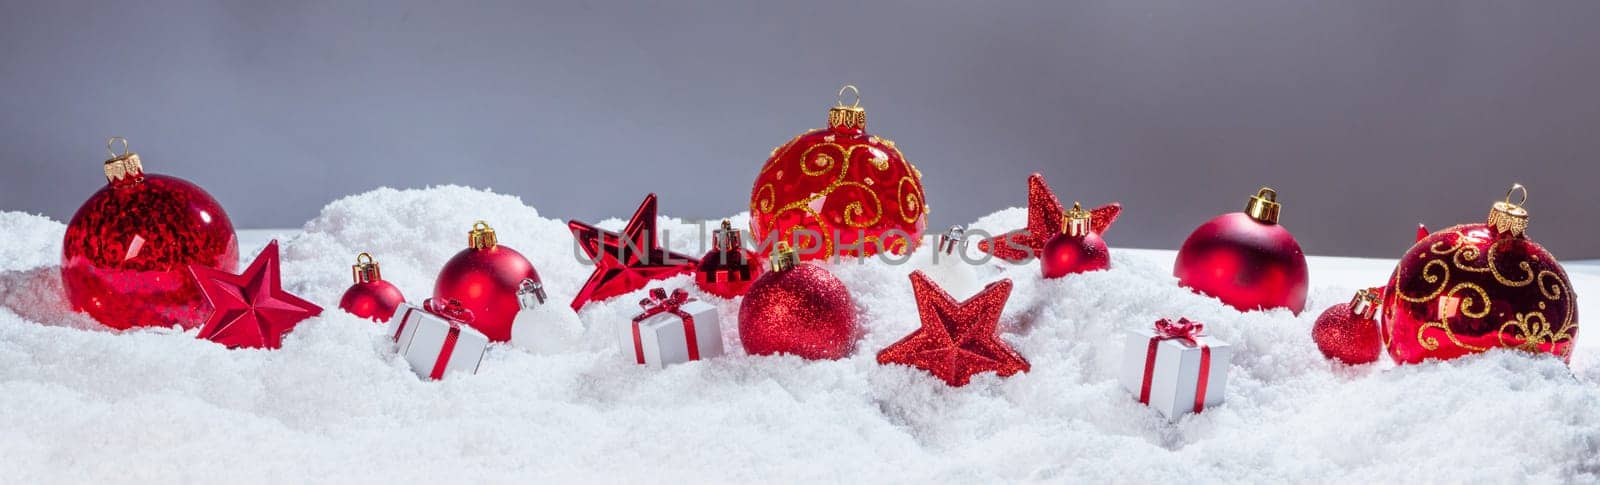 Christmas decoration frame of balls stars and gifts in snow in a row background copy space for text design element